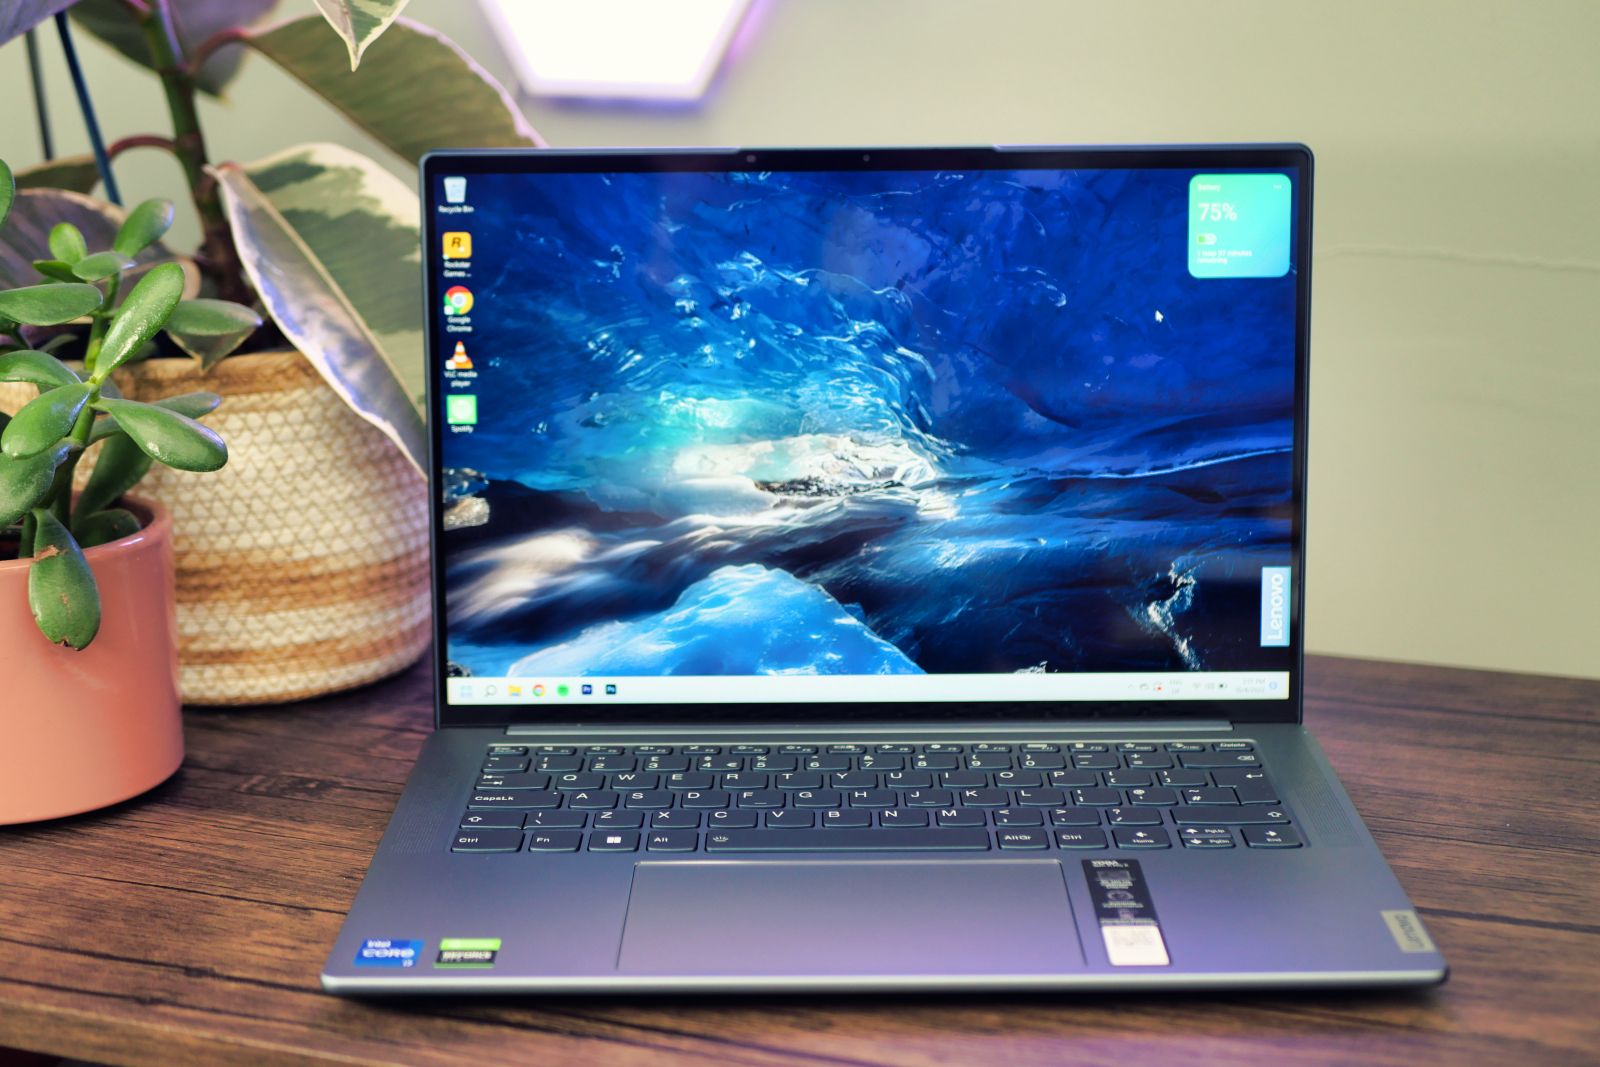 Lenovo Yoga Pro 7 14 review - The almost perfect ultrabook with AMD Zen 3+  -  Reviews